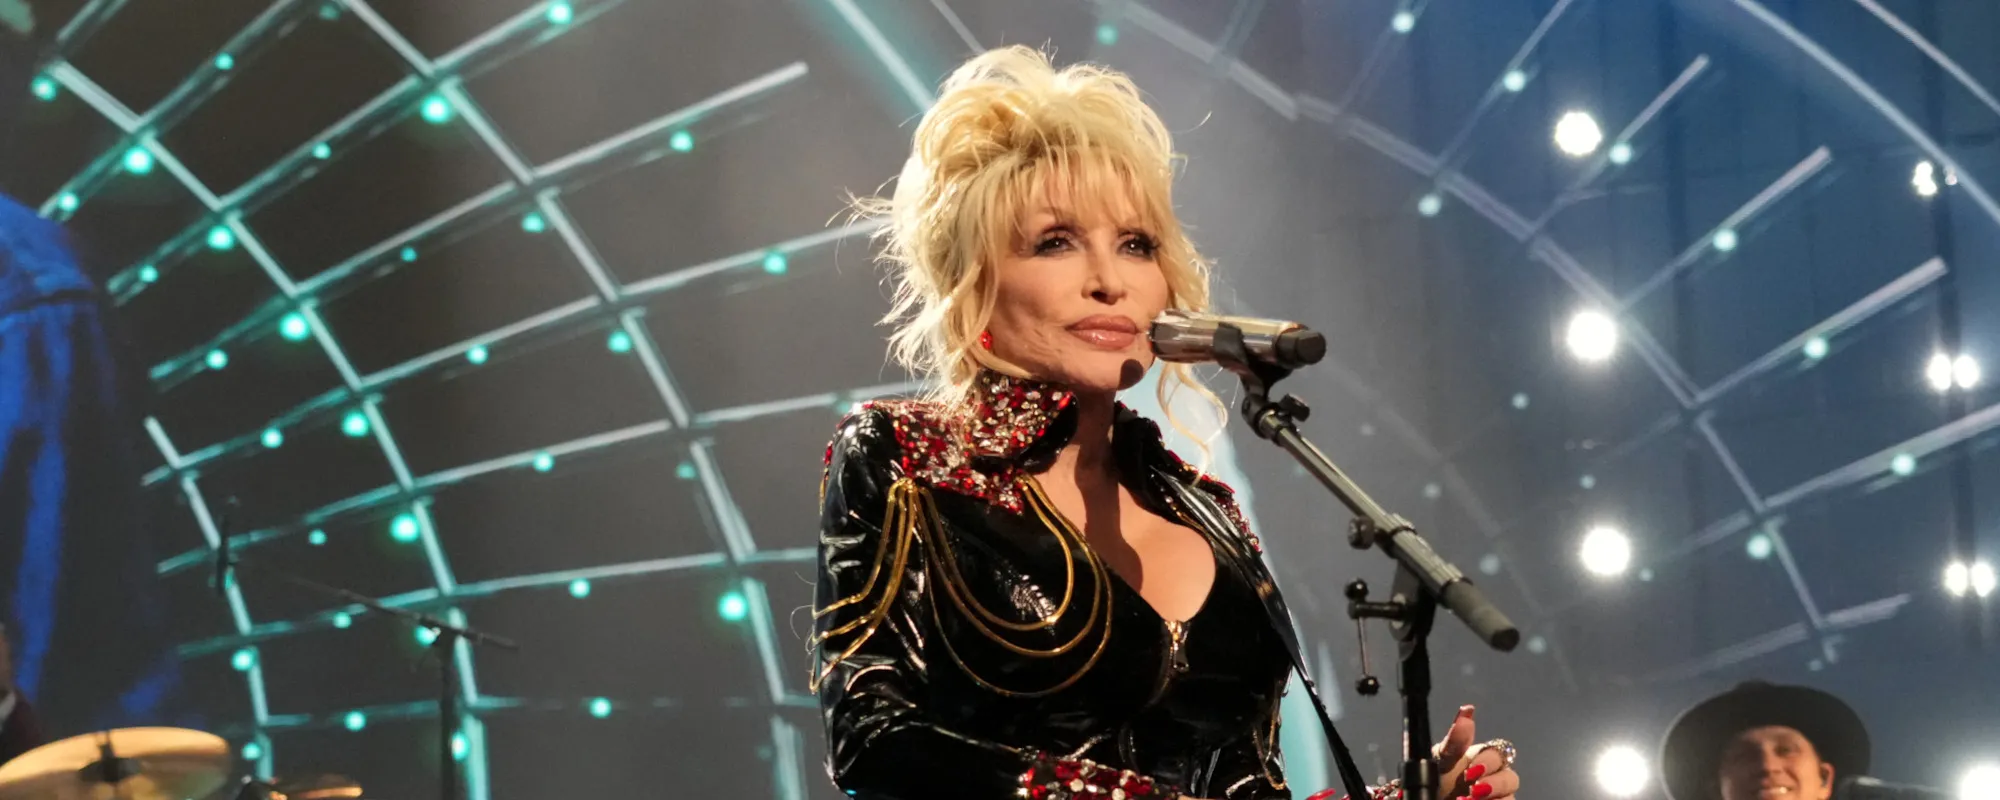 Live Tonight: Who’s Performing, Appearing (Dolly Parton) and How to Watch ‘The Voice’ Finale